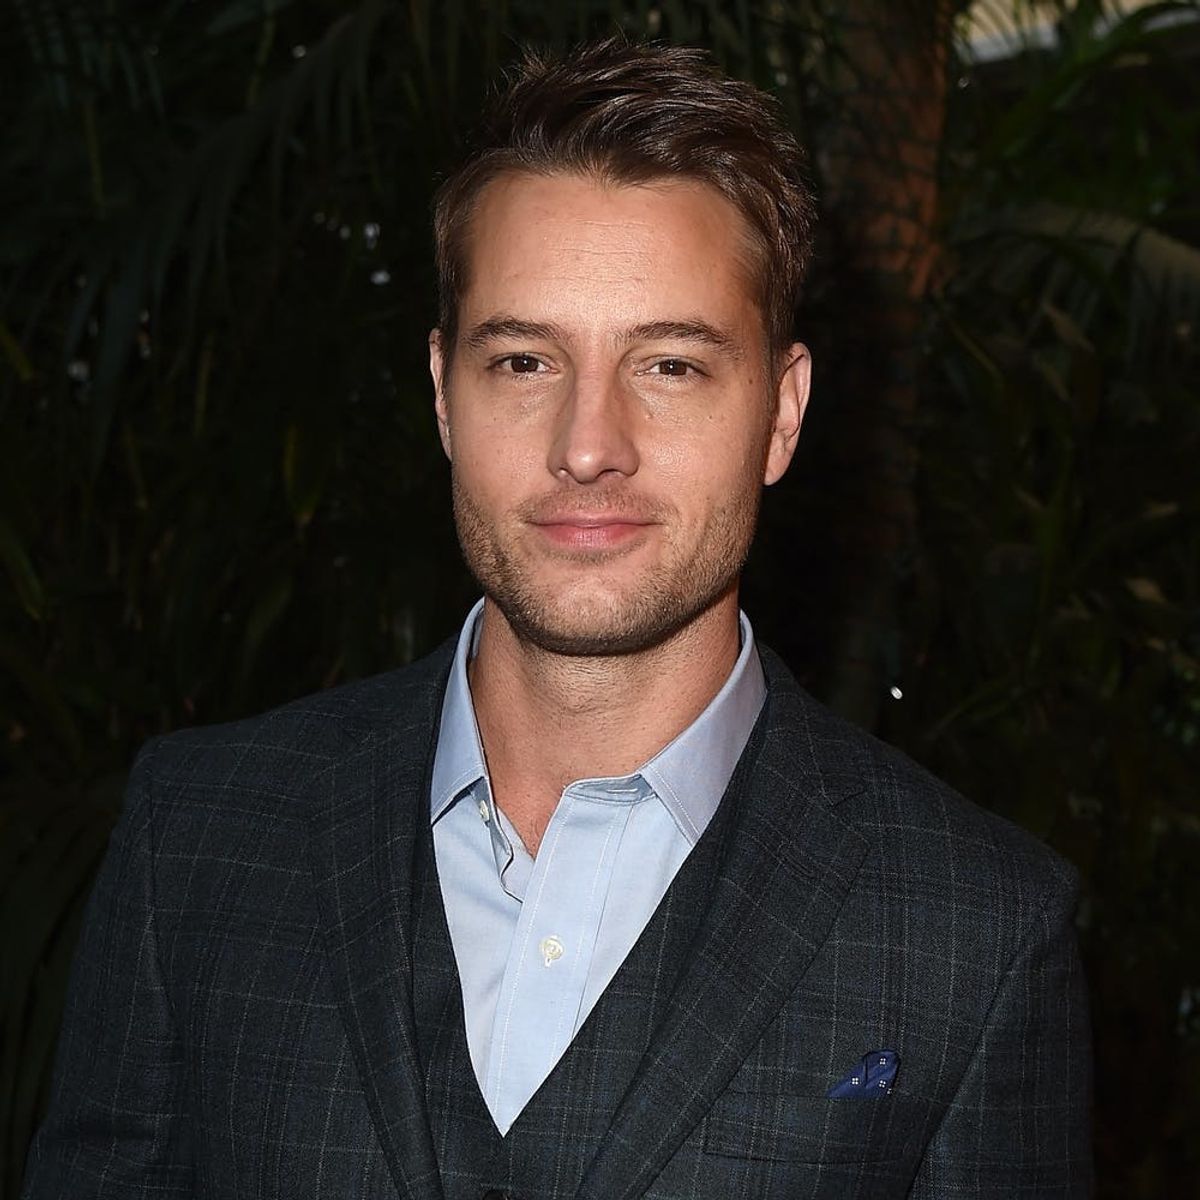 ‘This Is Us’ Star Justin Hartley Says Season 3 Has Some ‘Super Heartbreaking’ Revelations